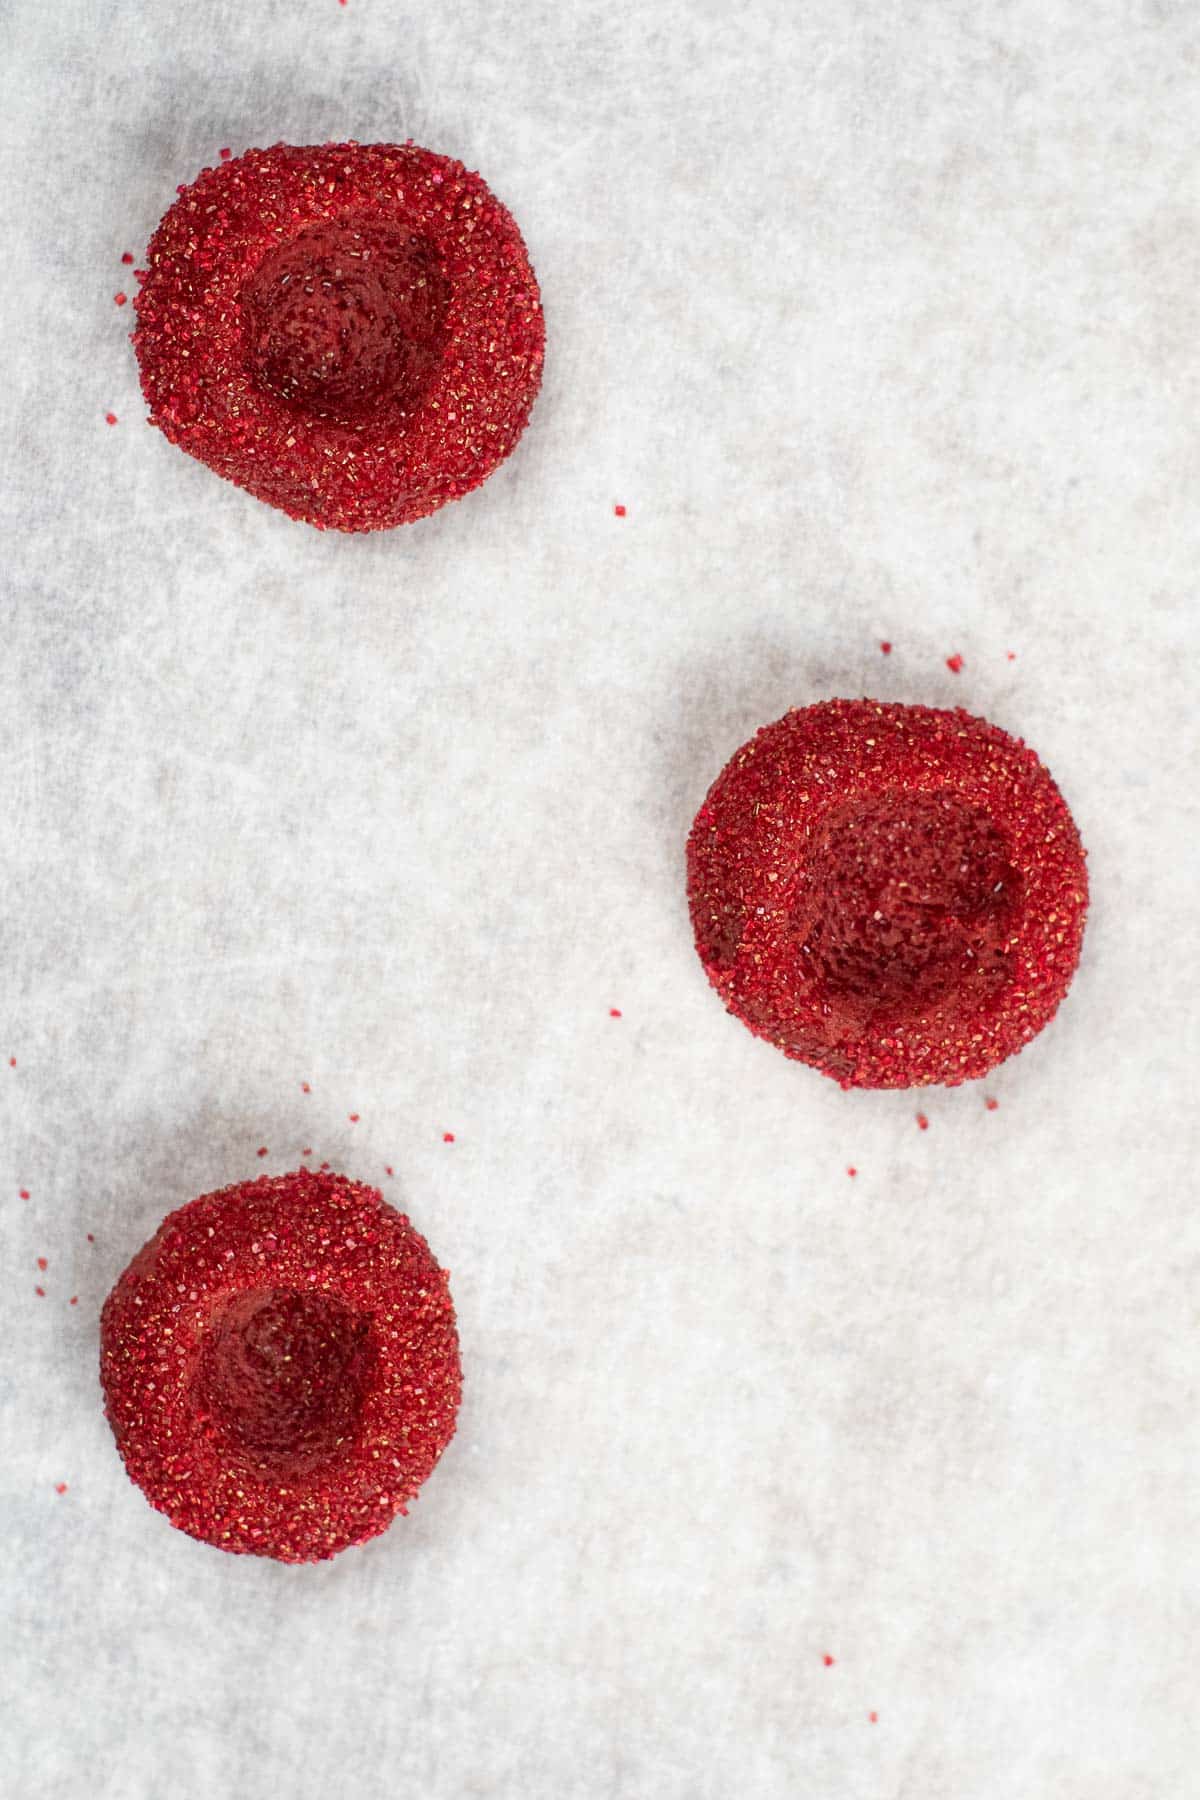 three sugar coated red velvet cookie dough with a thumbprint hole in each center.